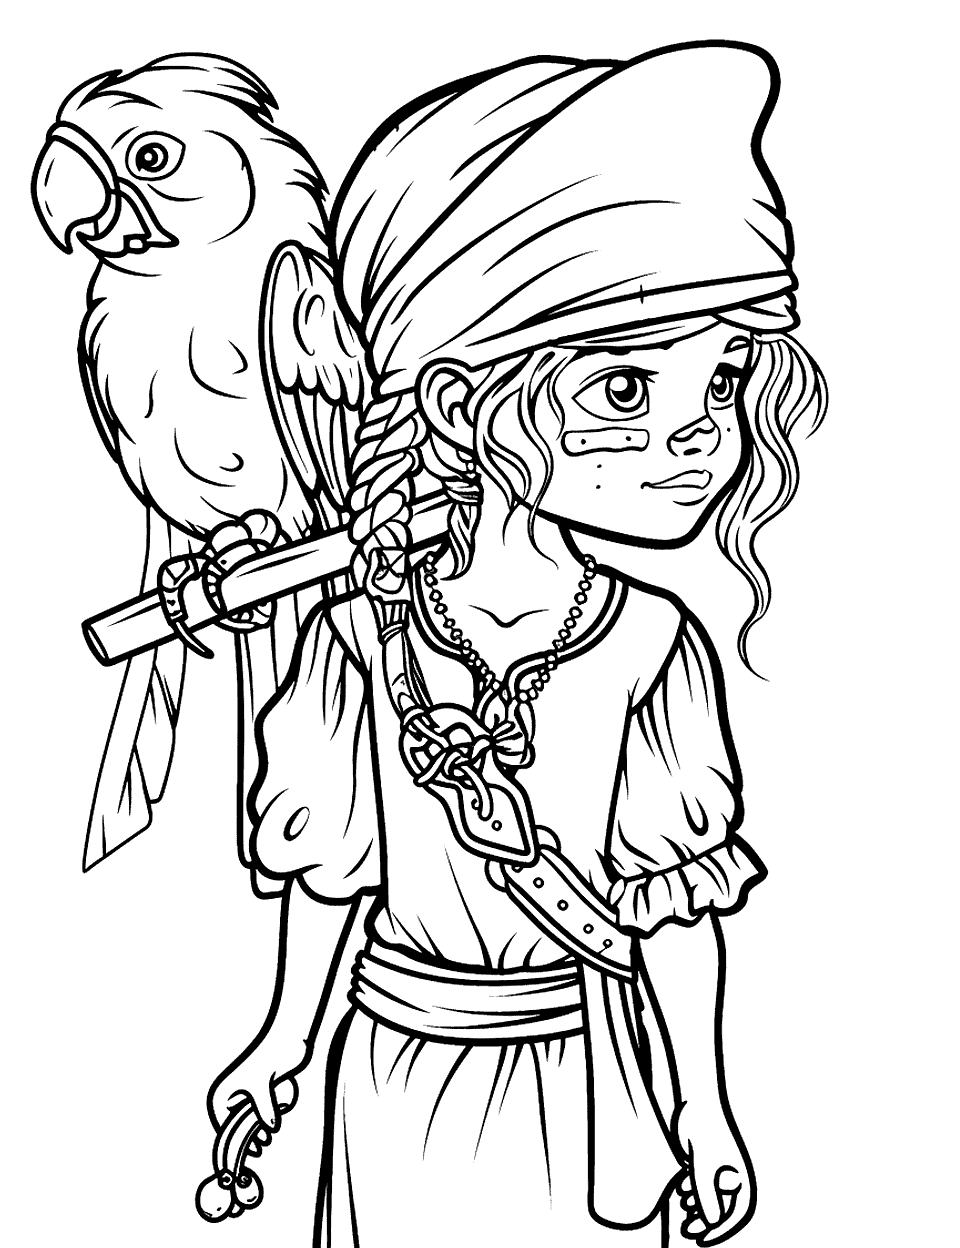 Girl Pirate and Her Parrot Coloring Page - A young girl pirate with a parrot on her shoulder.